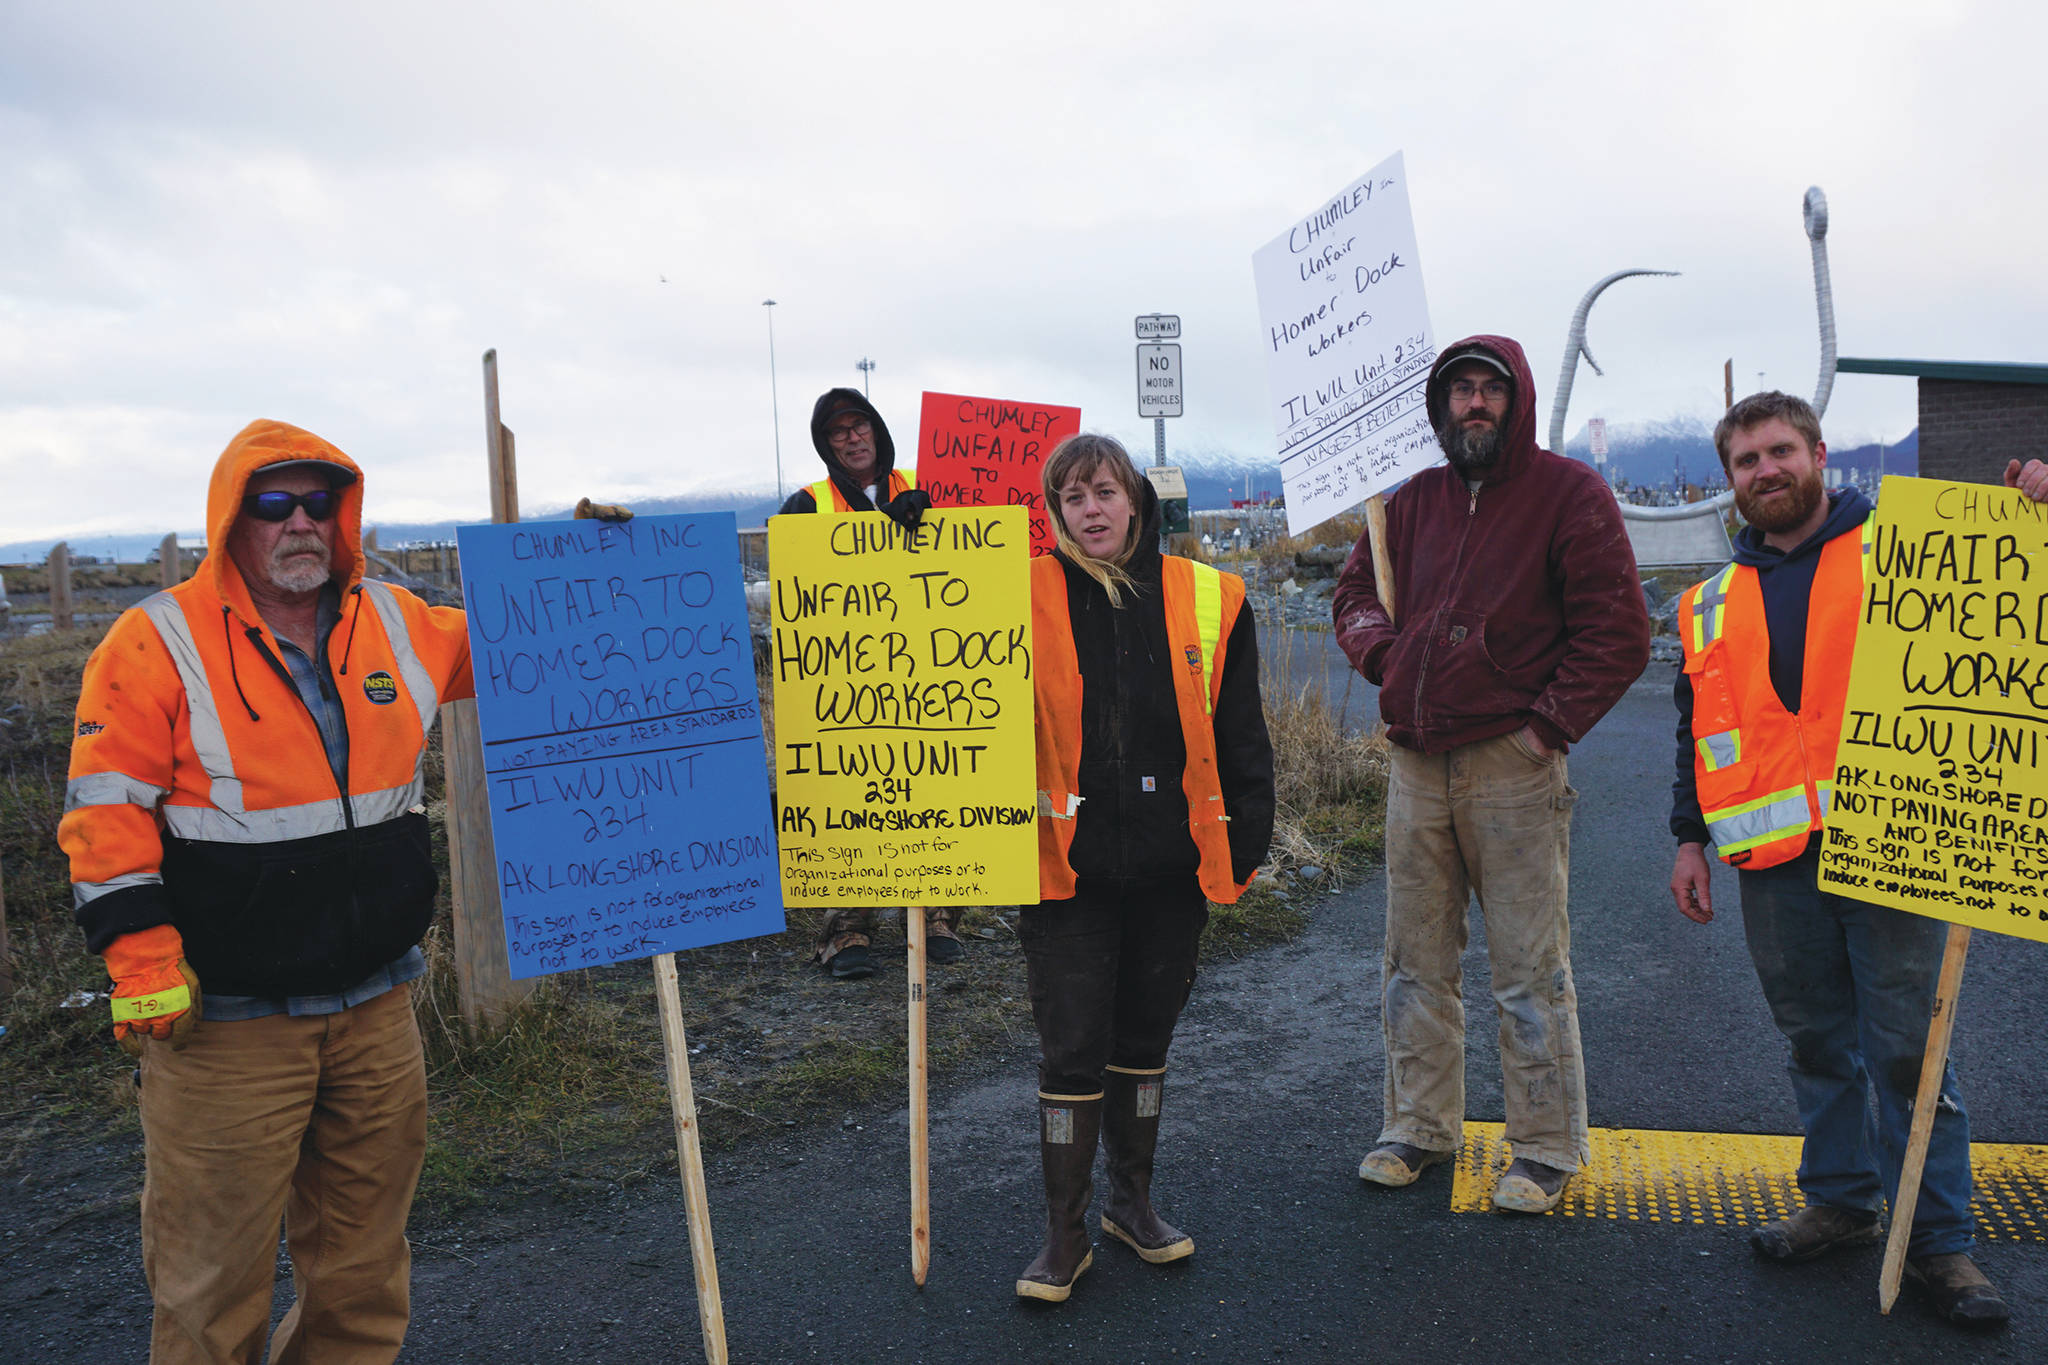 Homer longshore workers picket on the Homer Spit by Freight Dock Road on Tuesday, Dec. 17, 2019, in Homer, Alaska. They were part of a group of about 20 Alaska International Longshore and Warehouse Union members or supporters hold an “area standards” picket in response to Chumley’s Inc. use of workers to load a sulfur hauler ship the ILWU alleges are paid substandard wages. From left to right, are Grant Lane, Paul Gregoire, Carley Conemac, Jeff Allmendinger and Brian Dingman. (Photo by Michael Armstrong/Homer News)